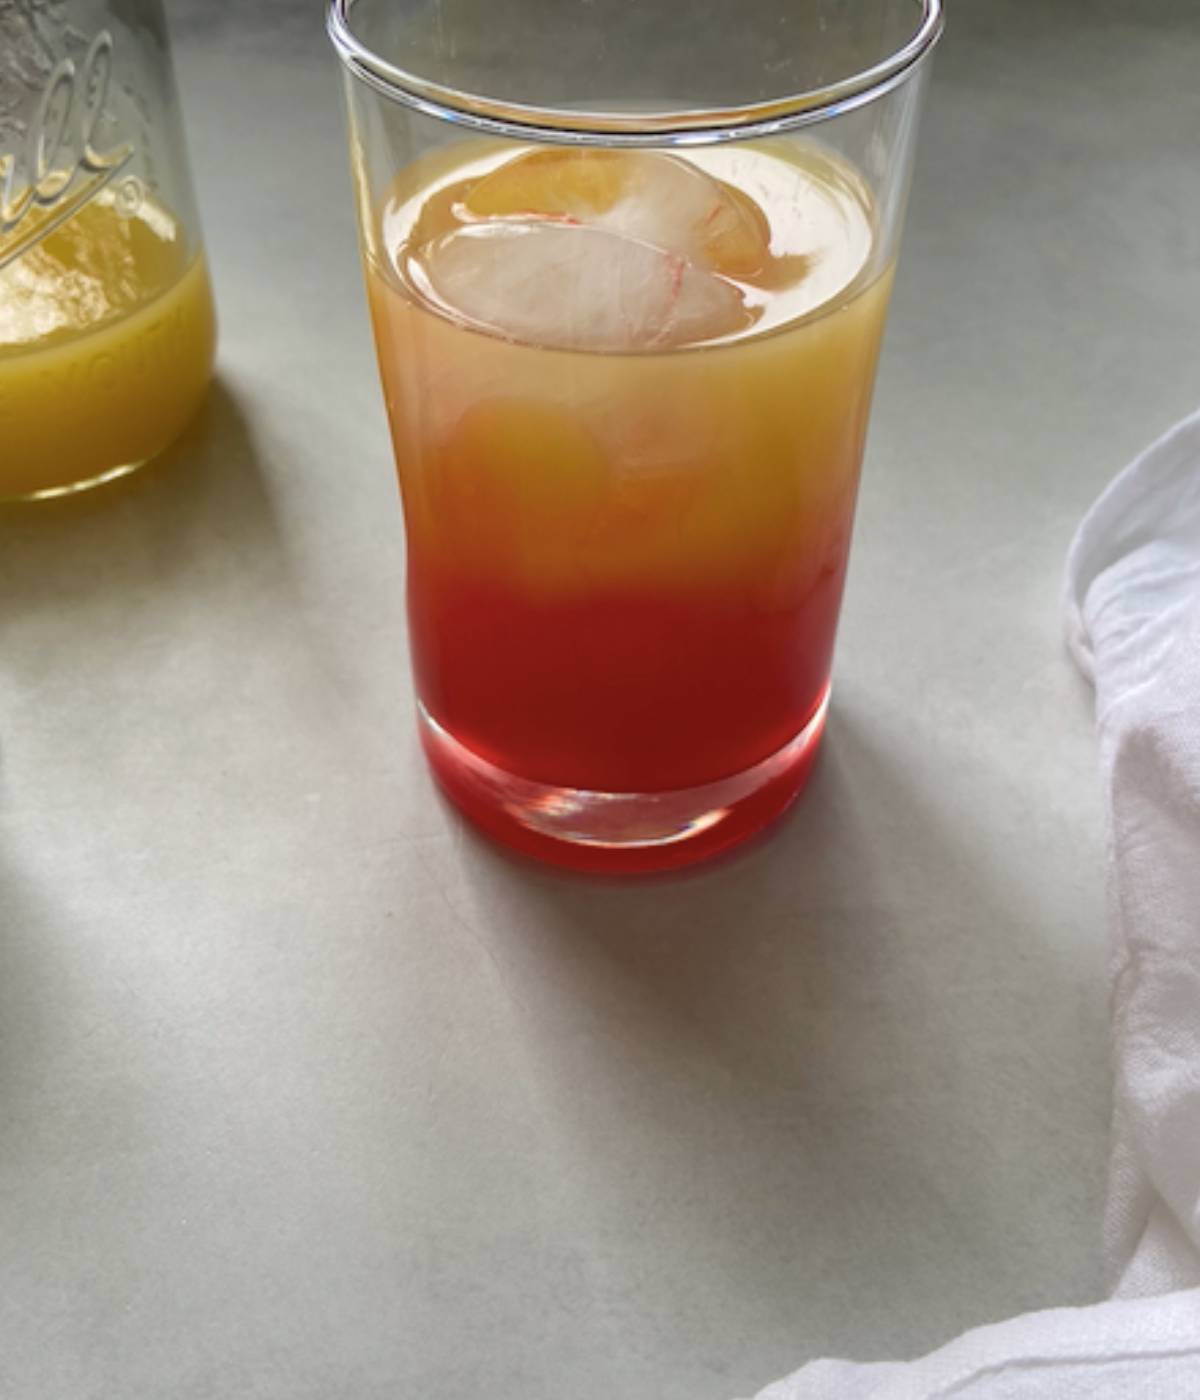 Grenadine added into cocktail glass to finish drink.